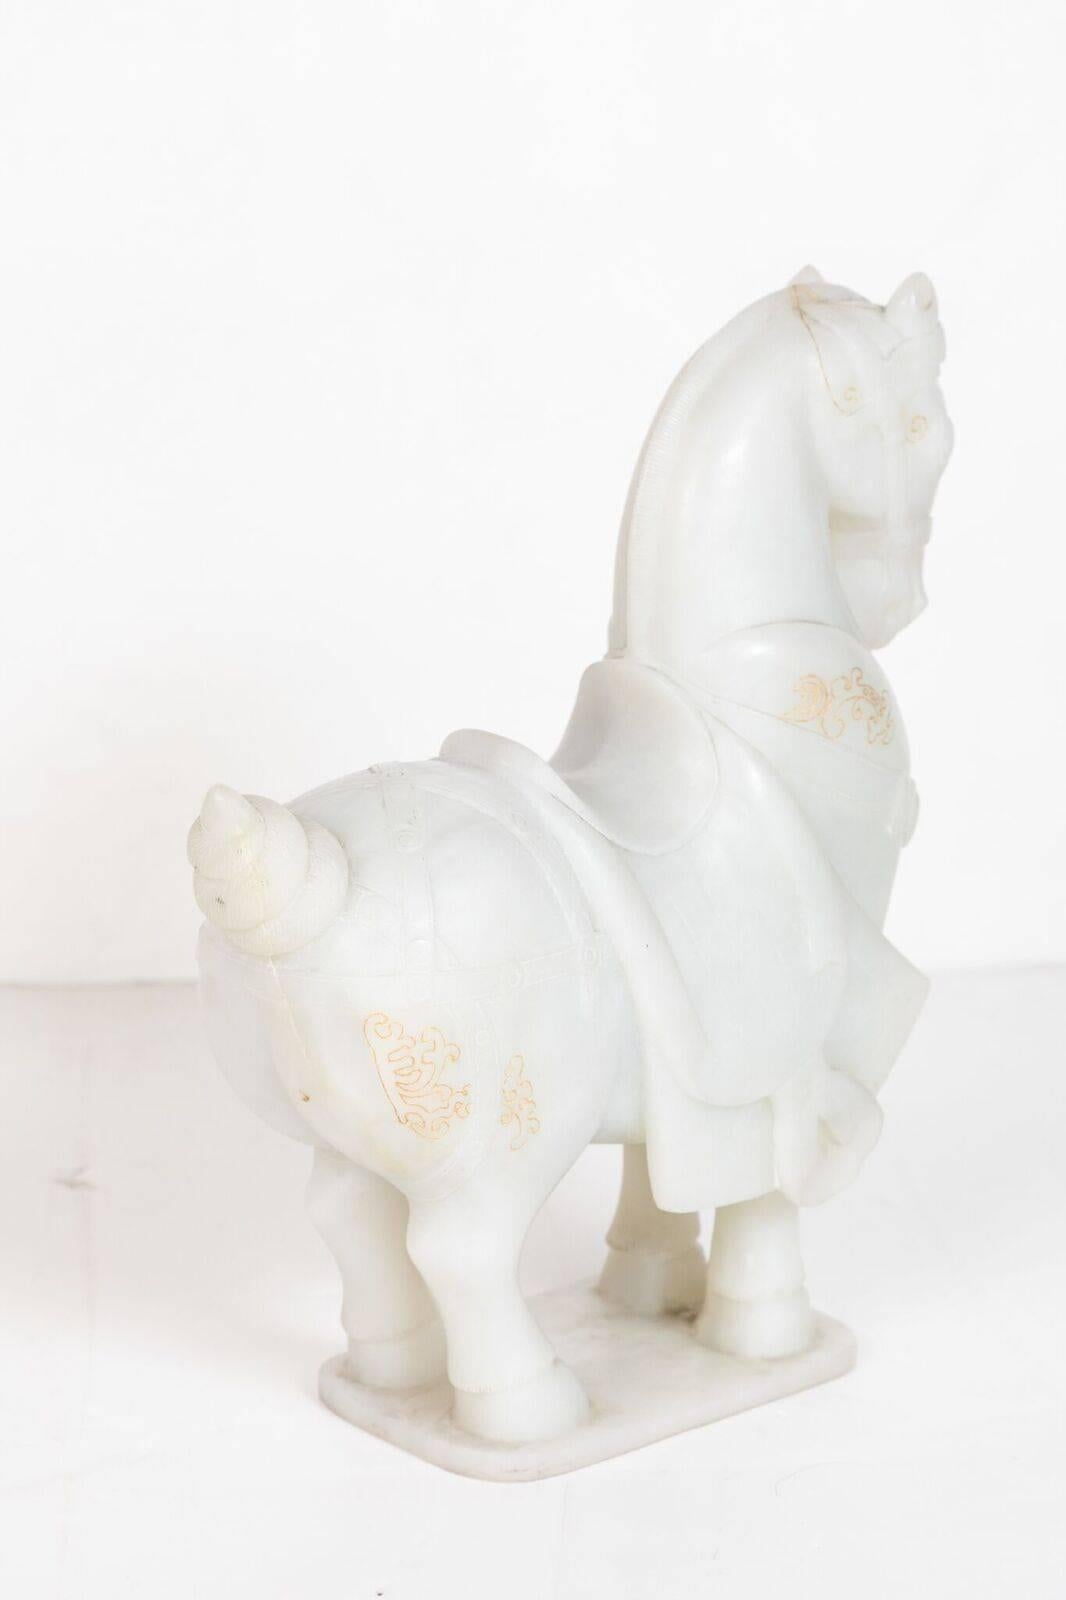 Other Fine, Late 20th Century, Han-Style, White Hardstone Horses For Sale